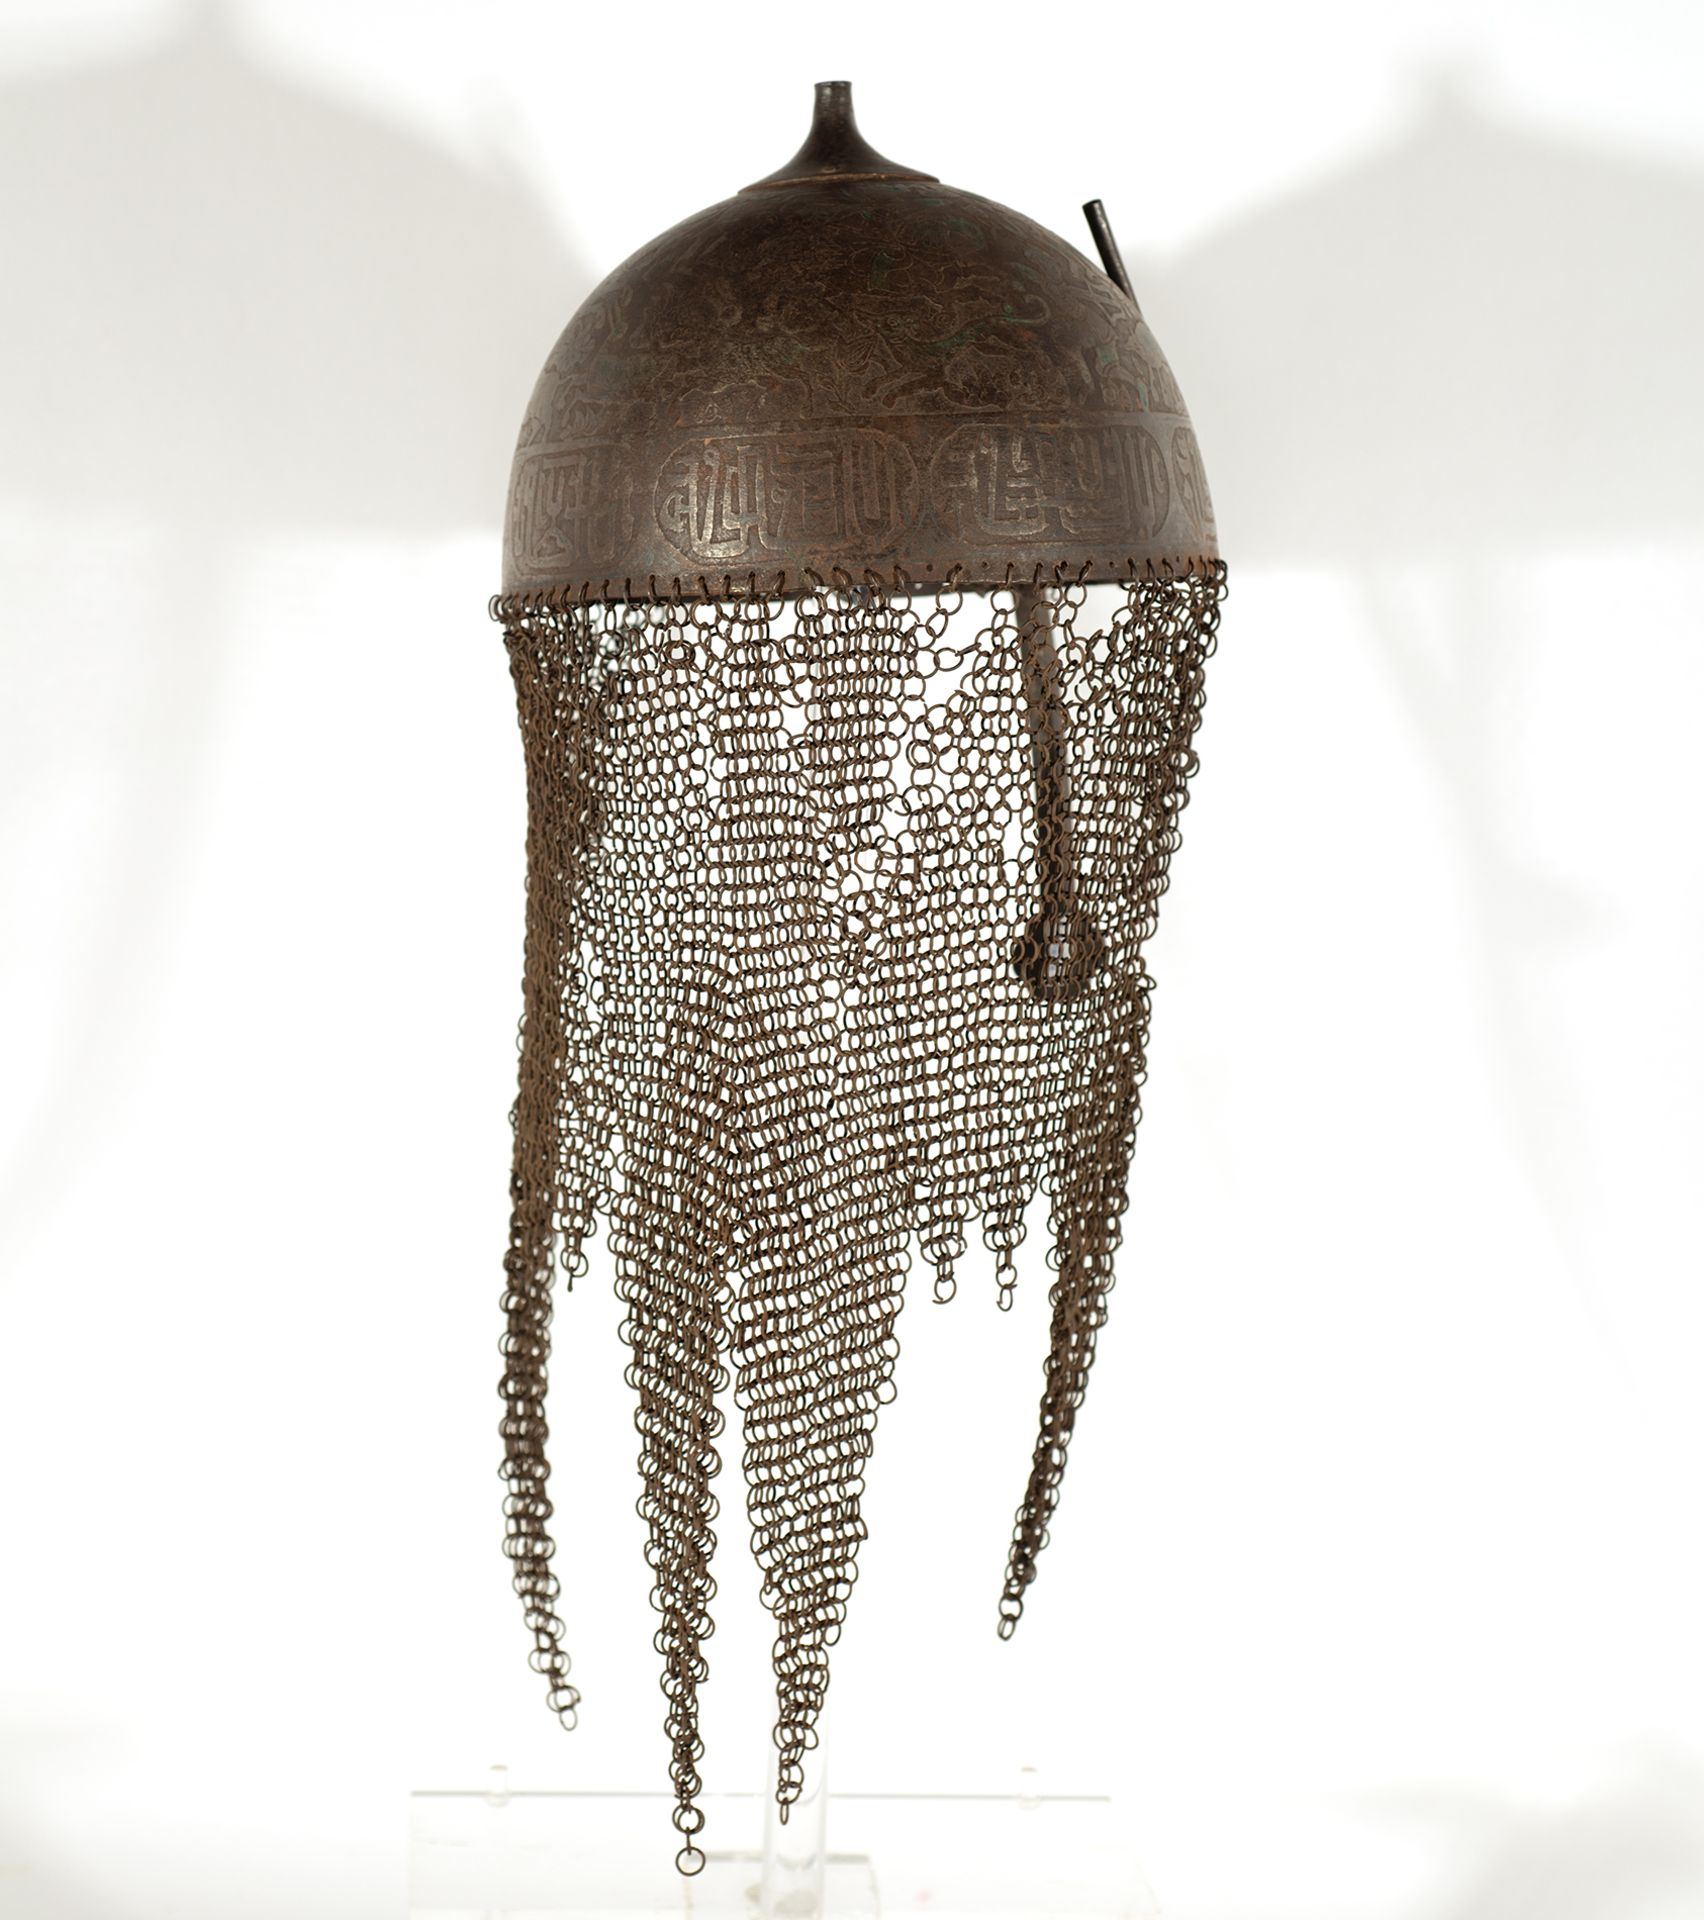 "Kulah Khud" Helmet of a Persian Infantry Knight, Central Asia, 19th century - Image 2 of 6